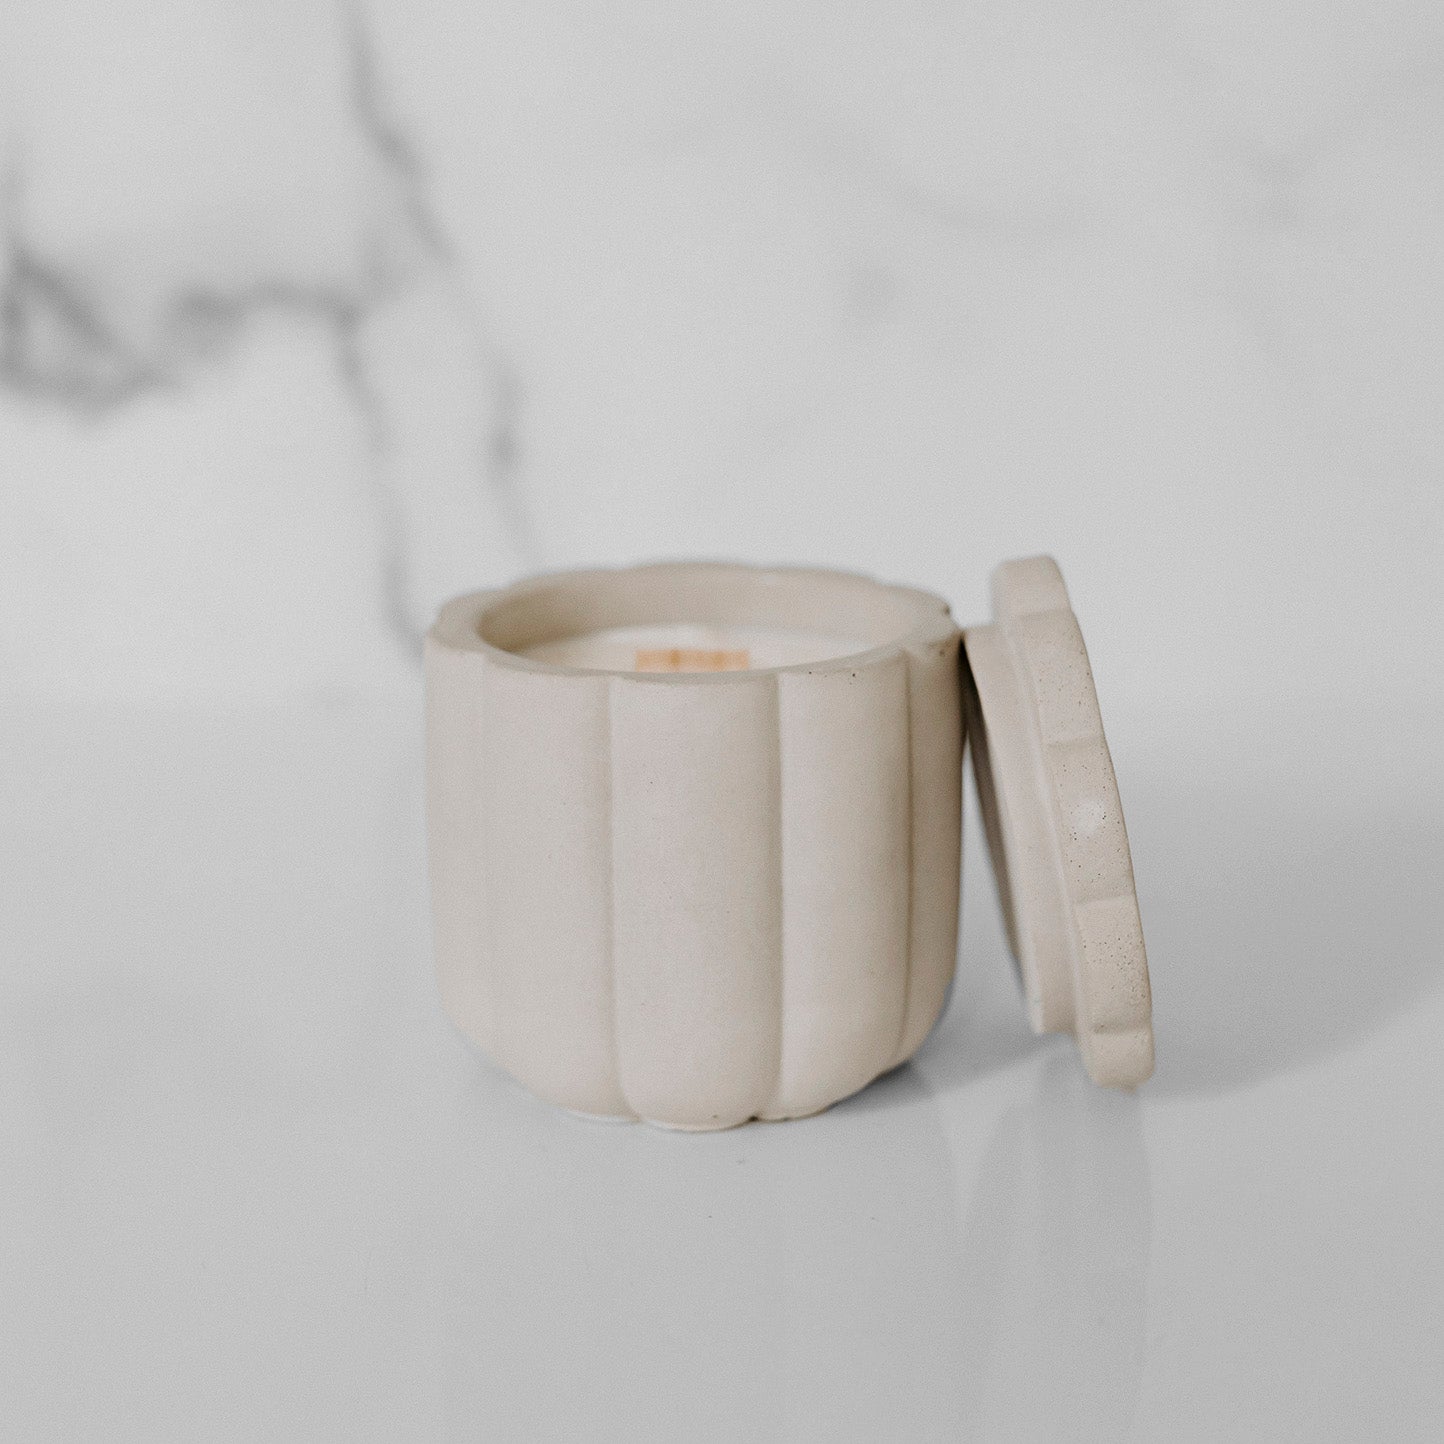 Love By The Moon- Flower Concrete Vessel Soy Candle